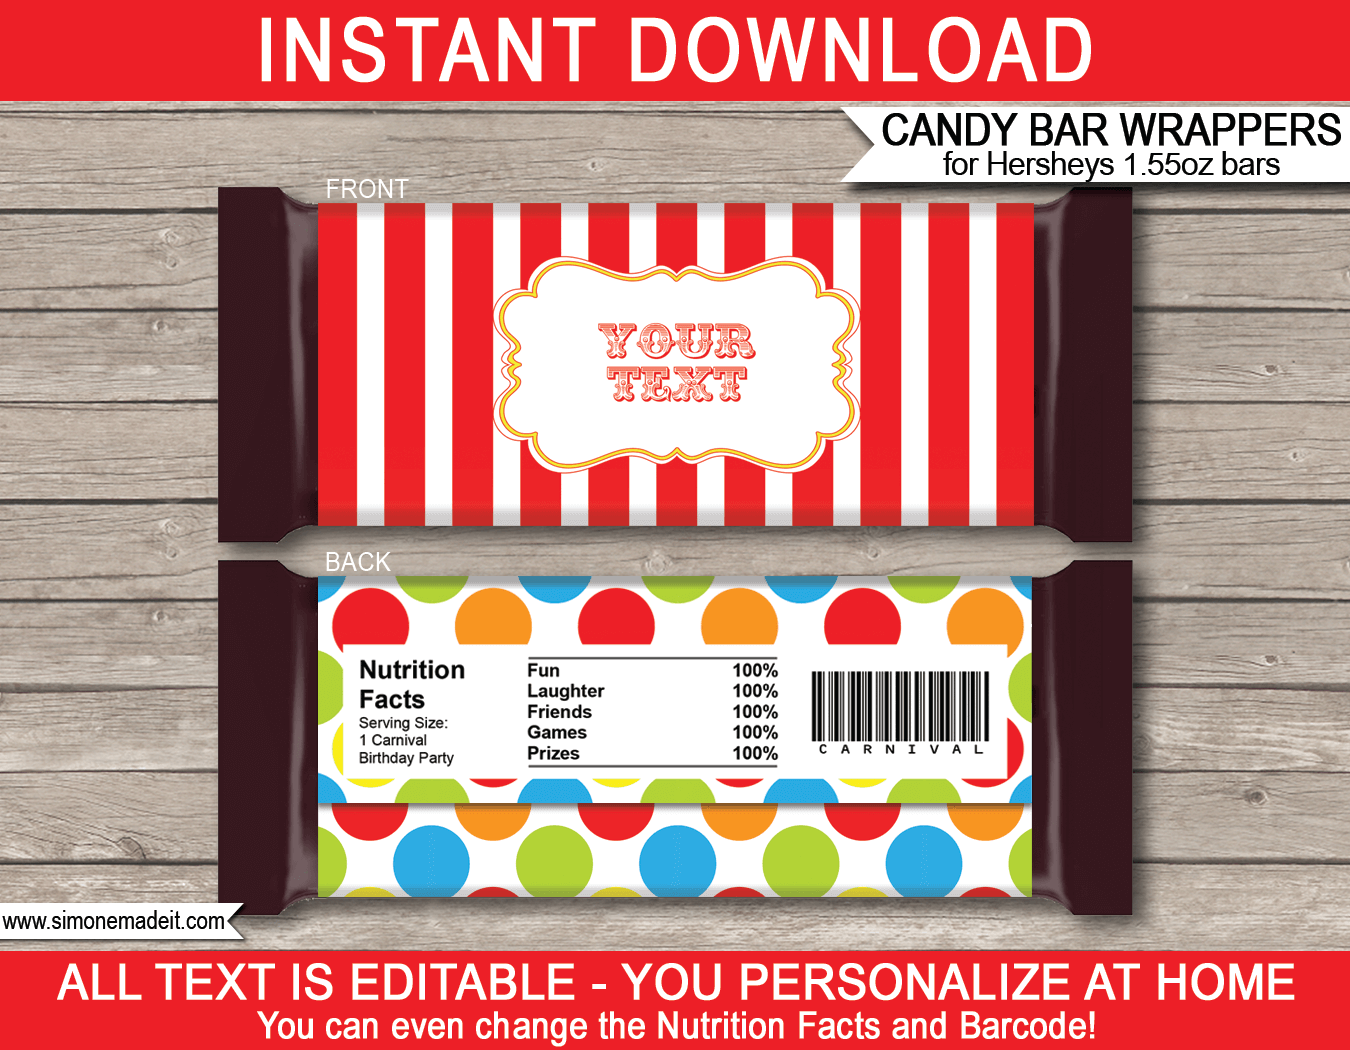 Carnival Hershey Candy Bar Wrappers | Circus | Birthday Party Favors | Personalized Candy Bars | Editable Template | INSTANT DOWNLOAD $3.00 via simonemadeit.com